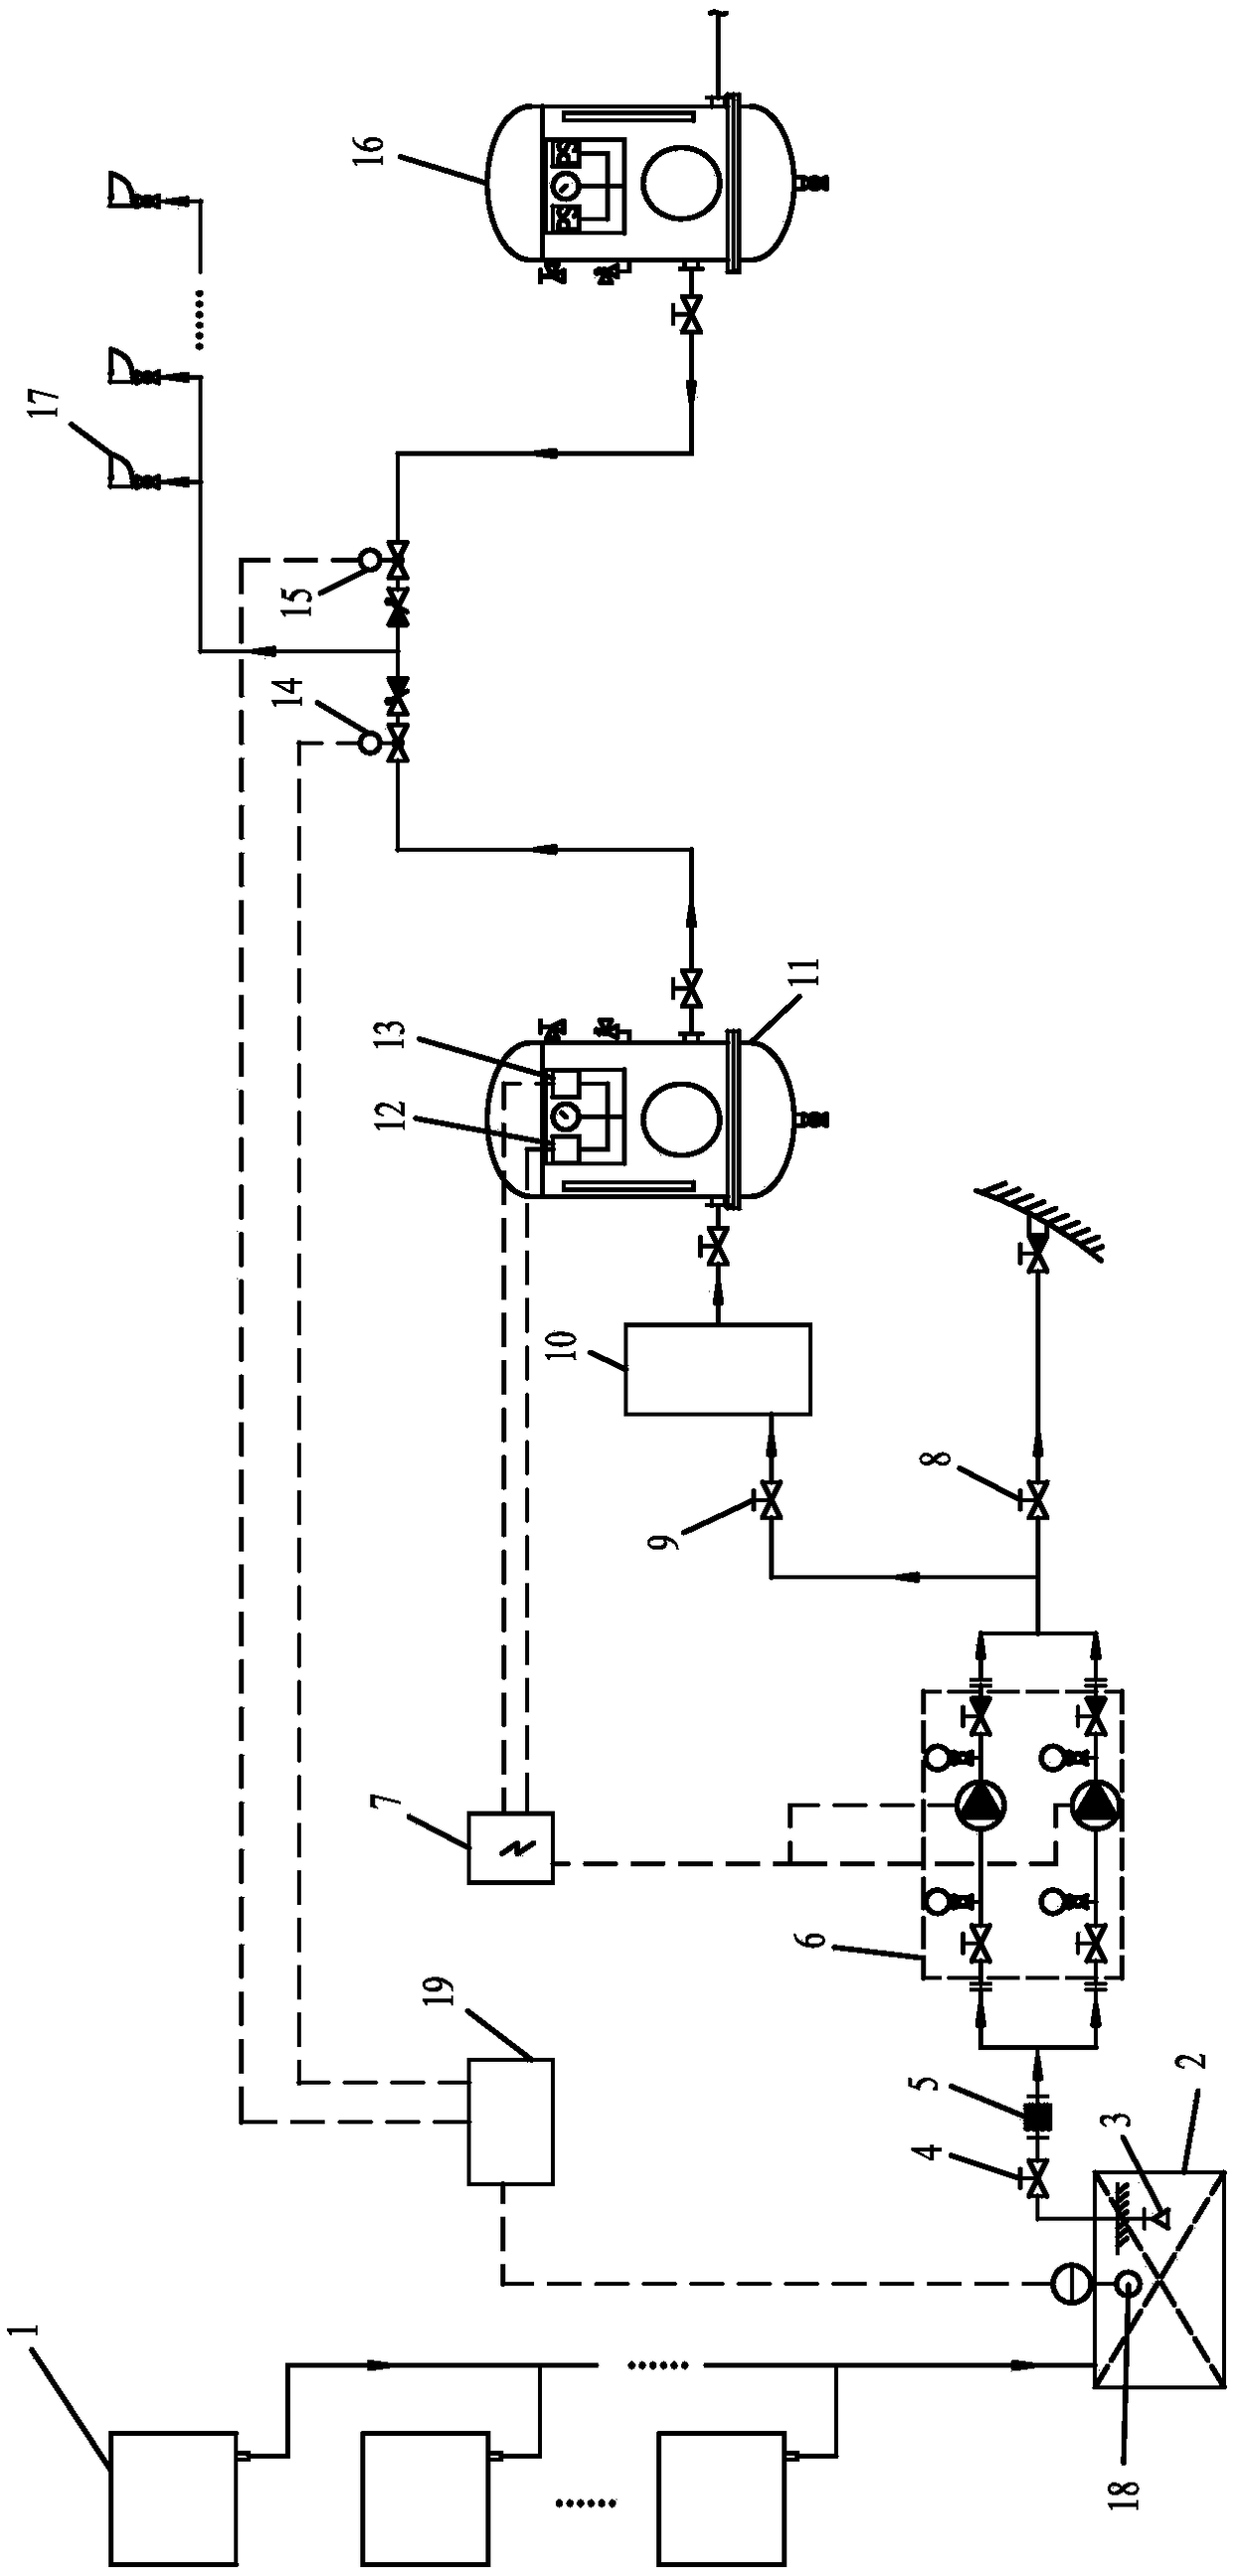 Ship sanitary system by utilizing air-conditioning condensed water